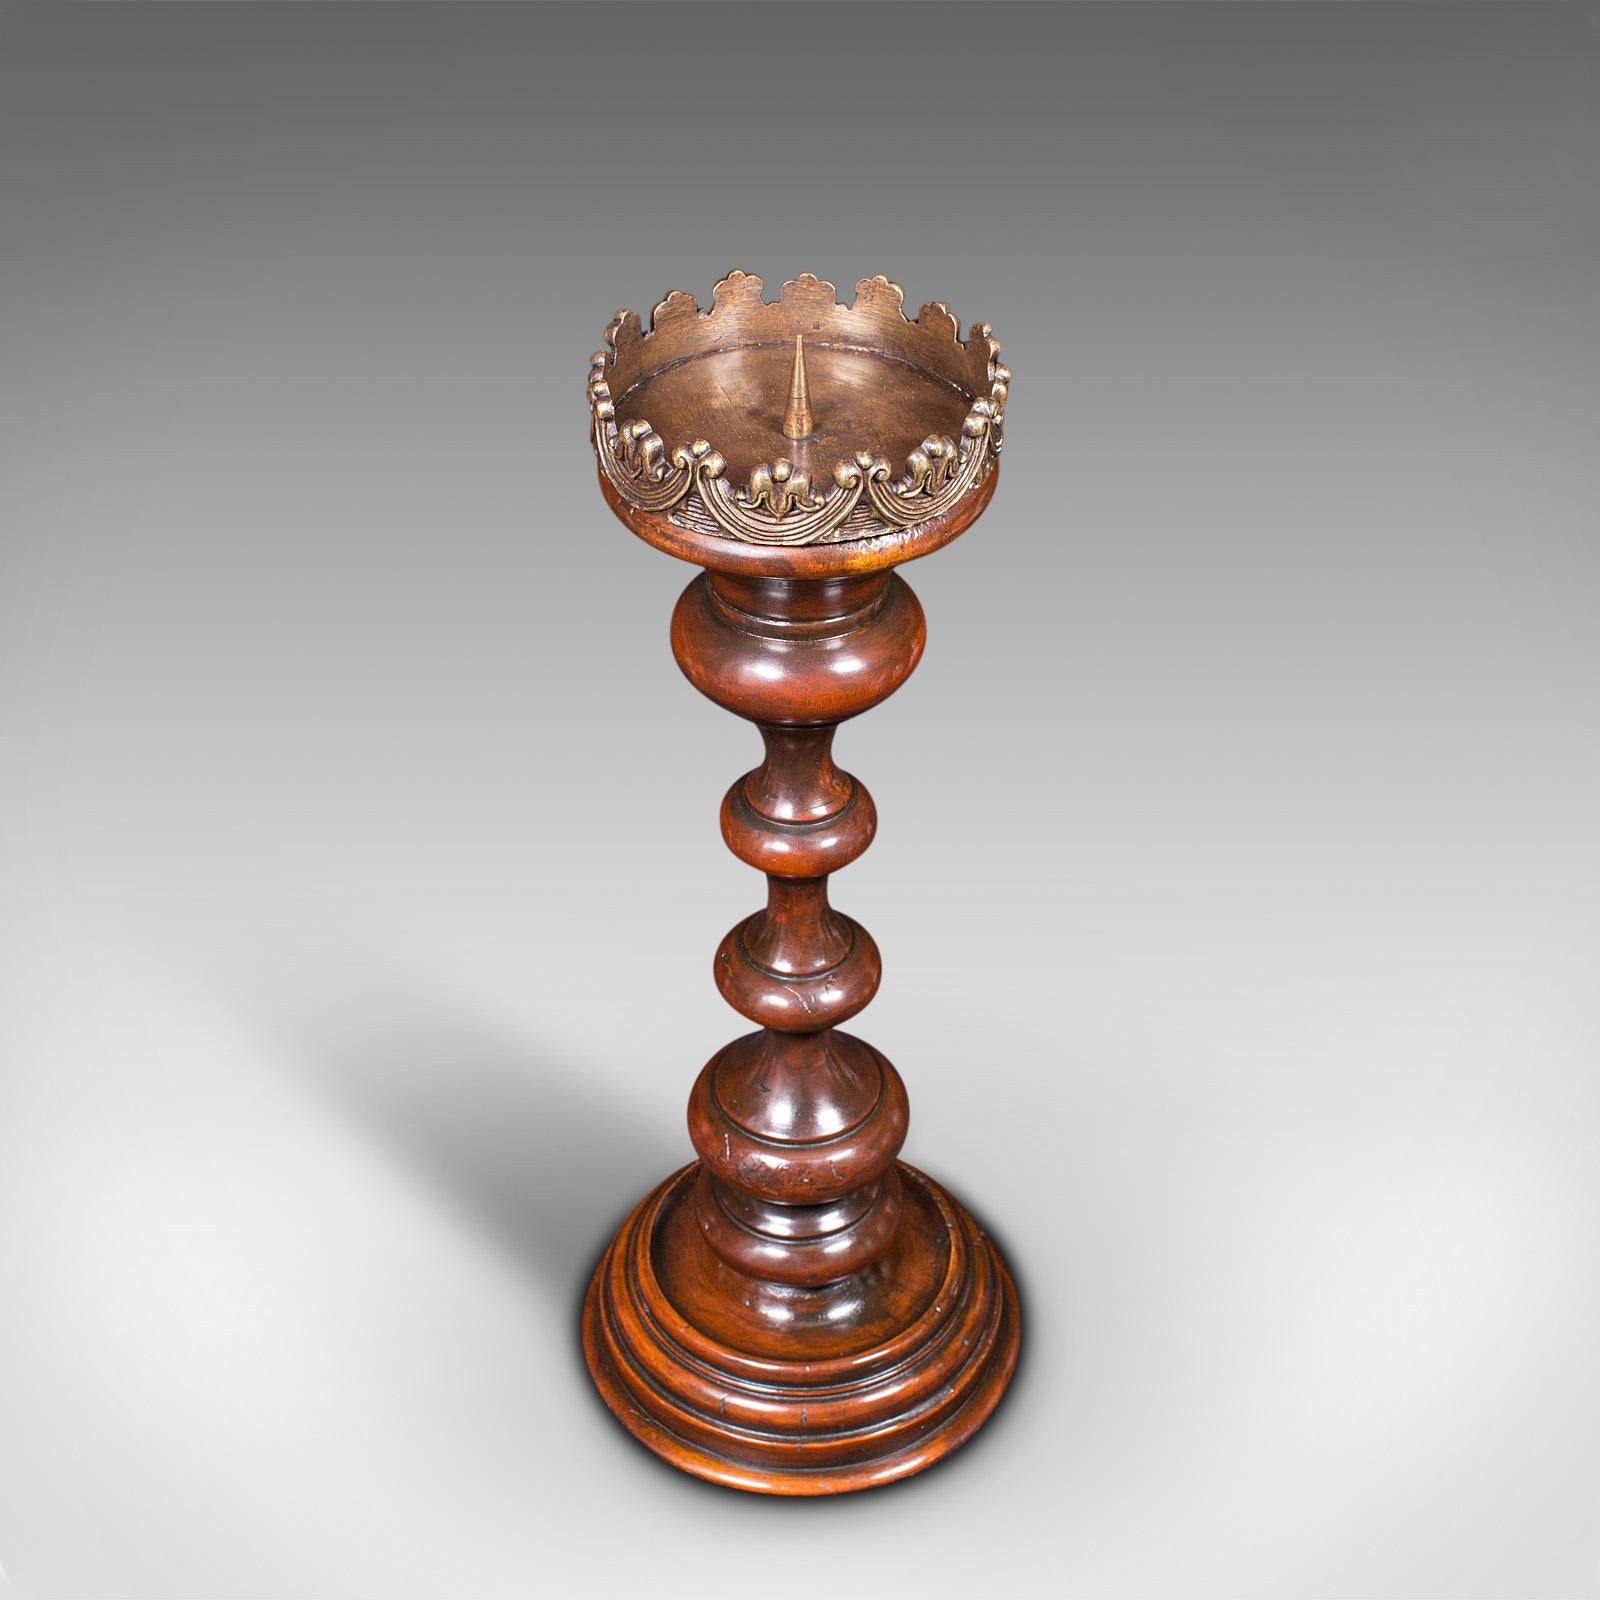 Tall Vintage Centrepiece Torchere, French, Beech, Candlestick, Ecclesiastical For Sale 2